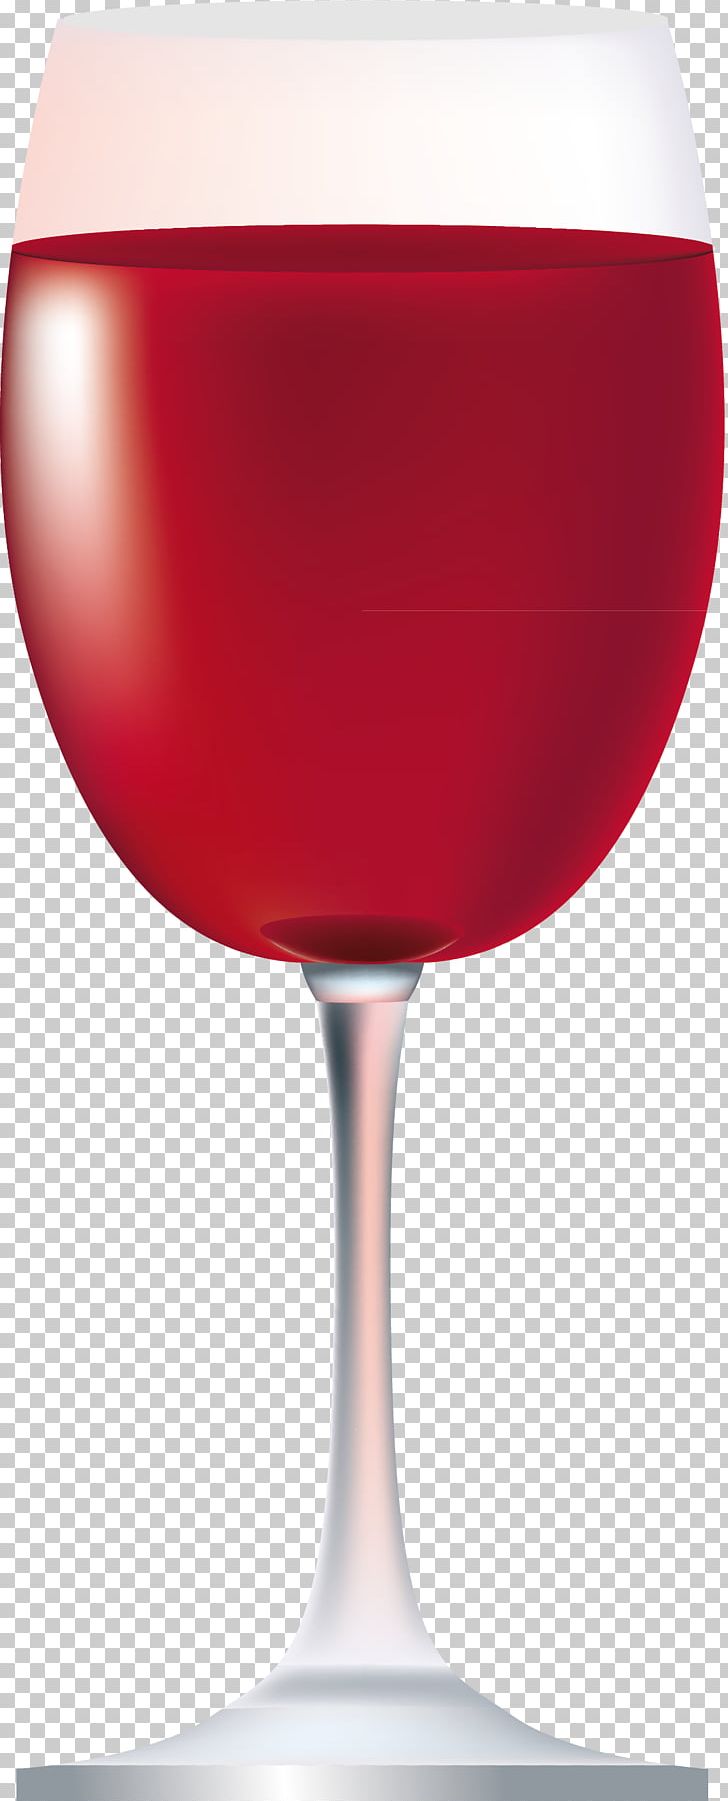 Wine Glass Juice Champagne Glass Red Wine PNG, Clipart, Alcoholic Drink, Champagne Glass, Champagne Stemware, Drink, Drinkware Free PNG Download